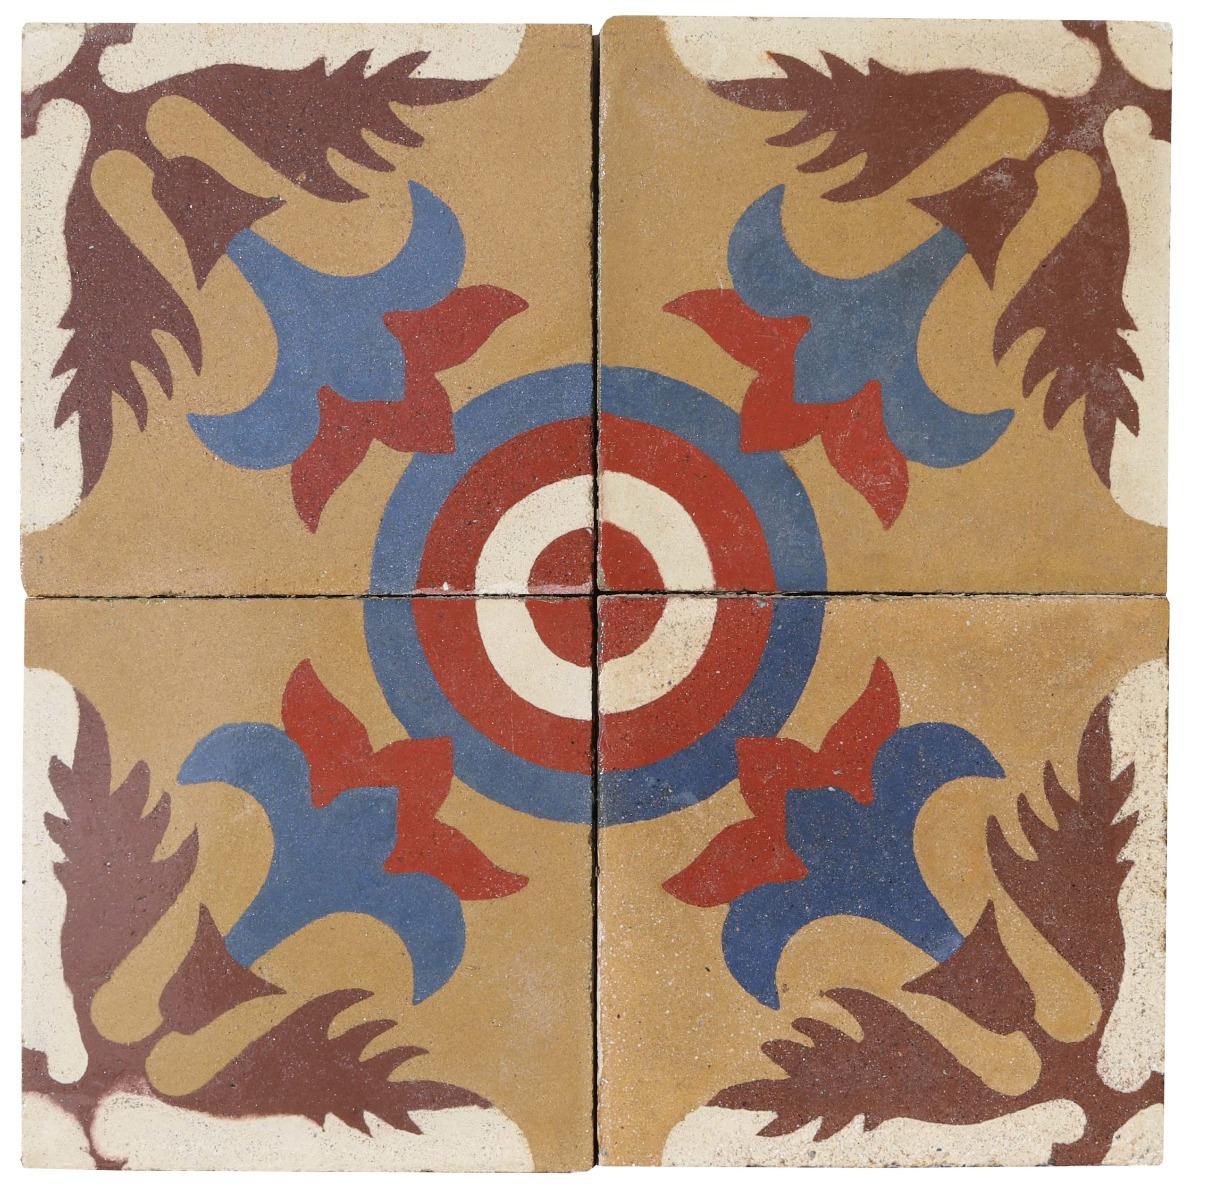 A set of 76 reclaimed encaustic cement tiles featuring a floral, bulls-eye pattern, in blue, red, white, olive and brown colours. These tiles will cover 3 m2 or 32 sq ft.